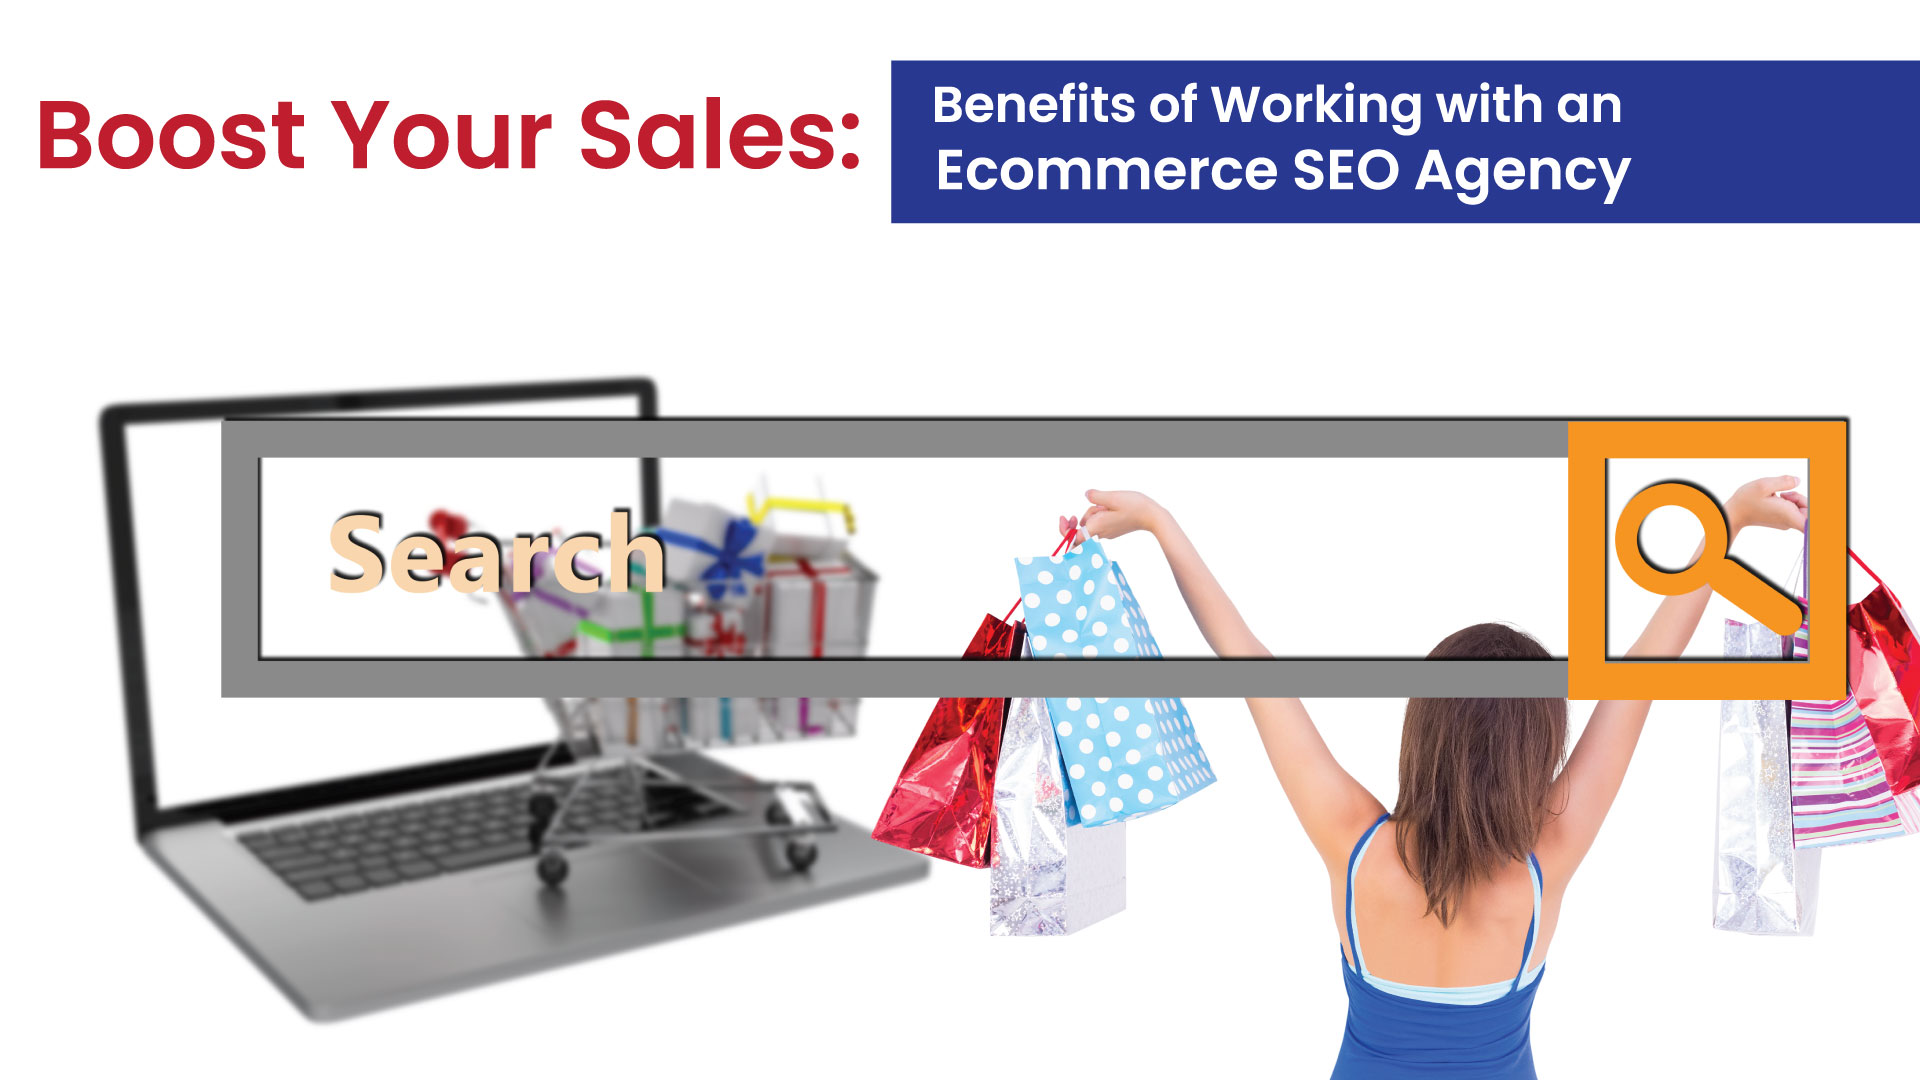 Boost-Your-Sales-Benefits-of-Working-with-an-Ecommerce-SEO-Agency-Holinex-Digital